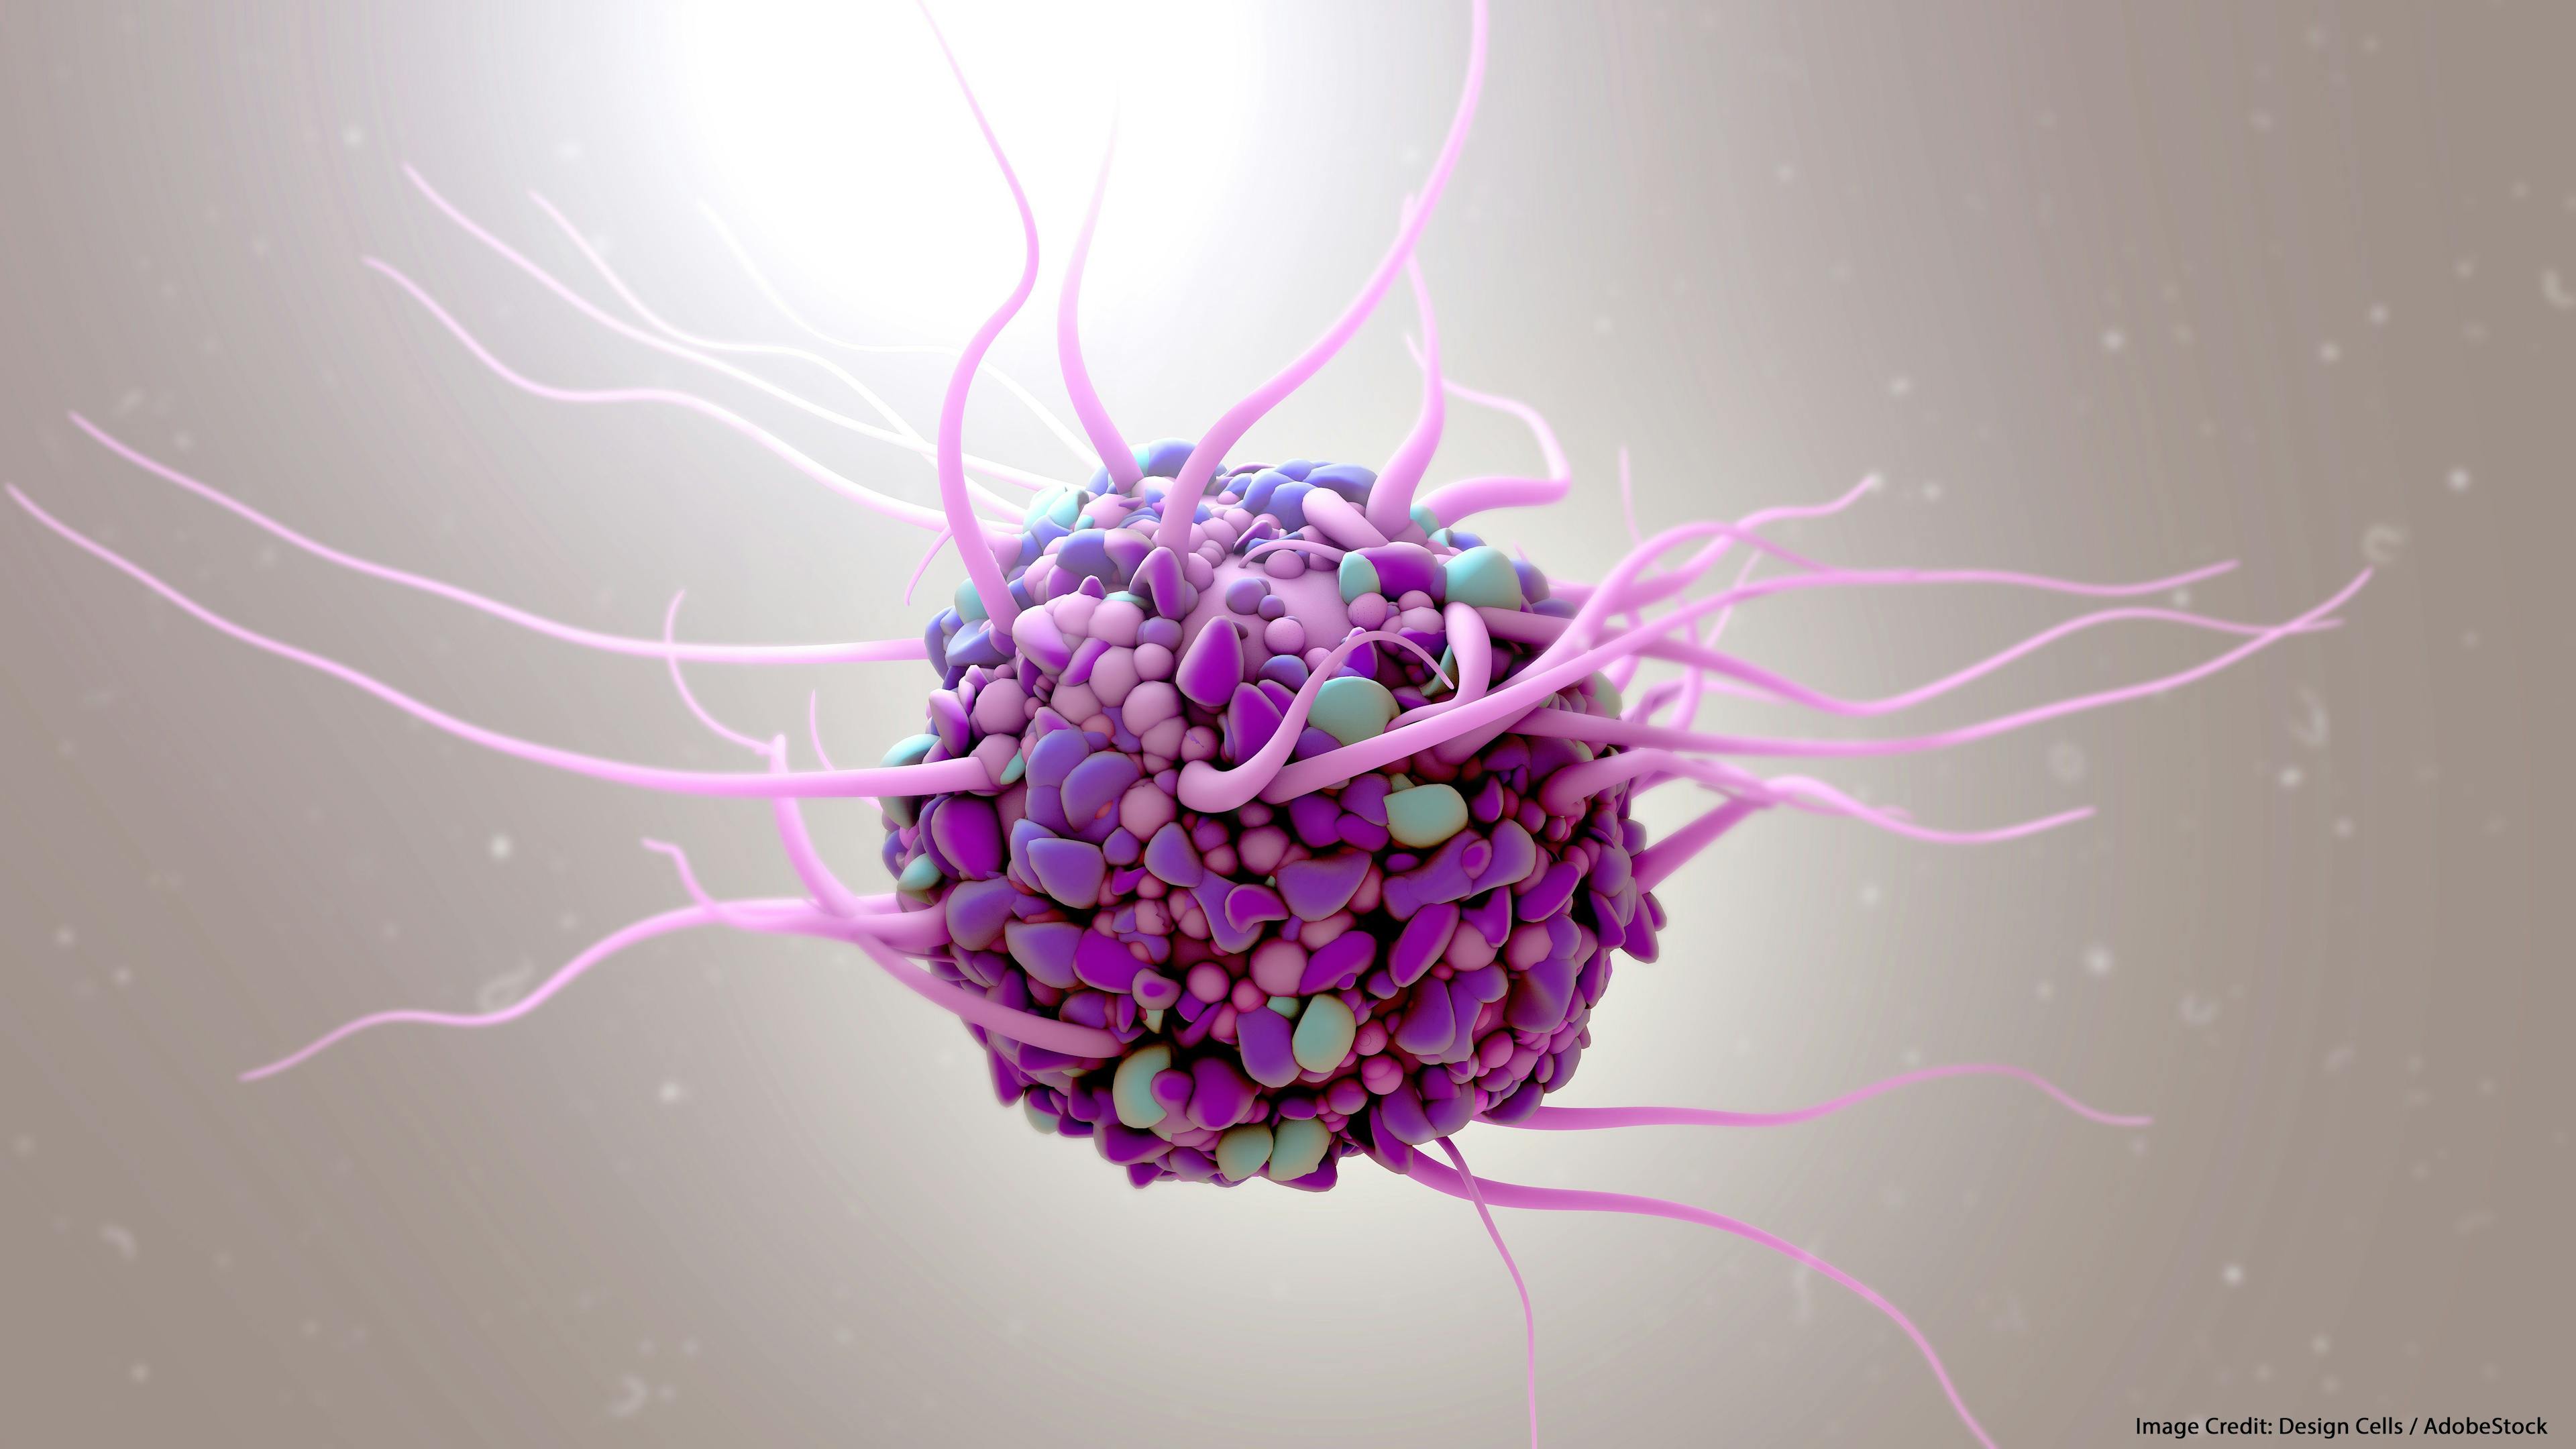 SGO 2019: Dendritic Cell–Based Immunotherapy Shows “Dramatic” Response for Ovarian Cancer